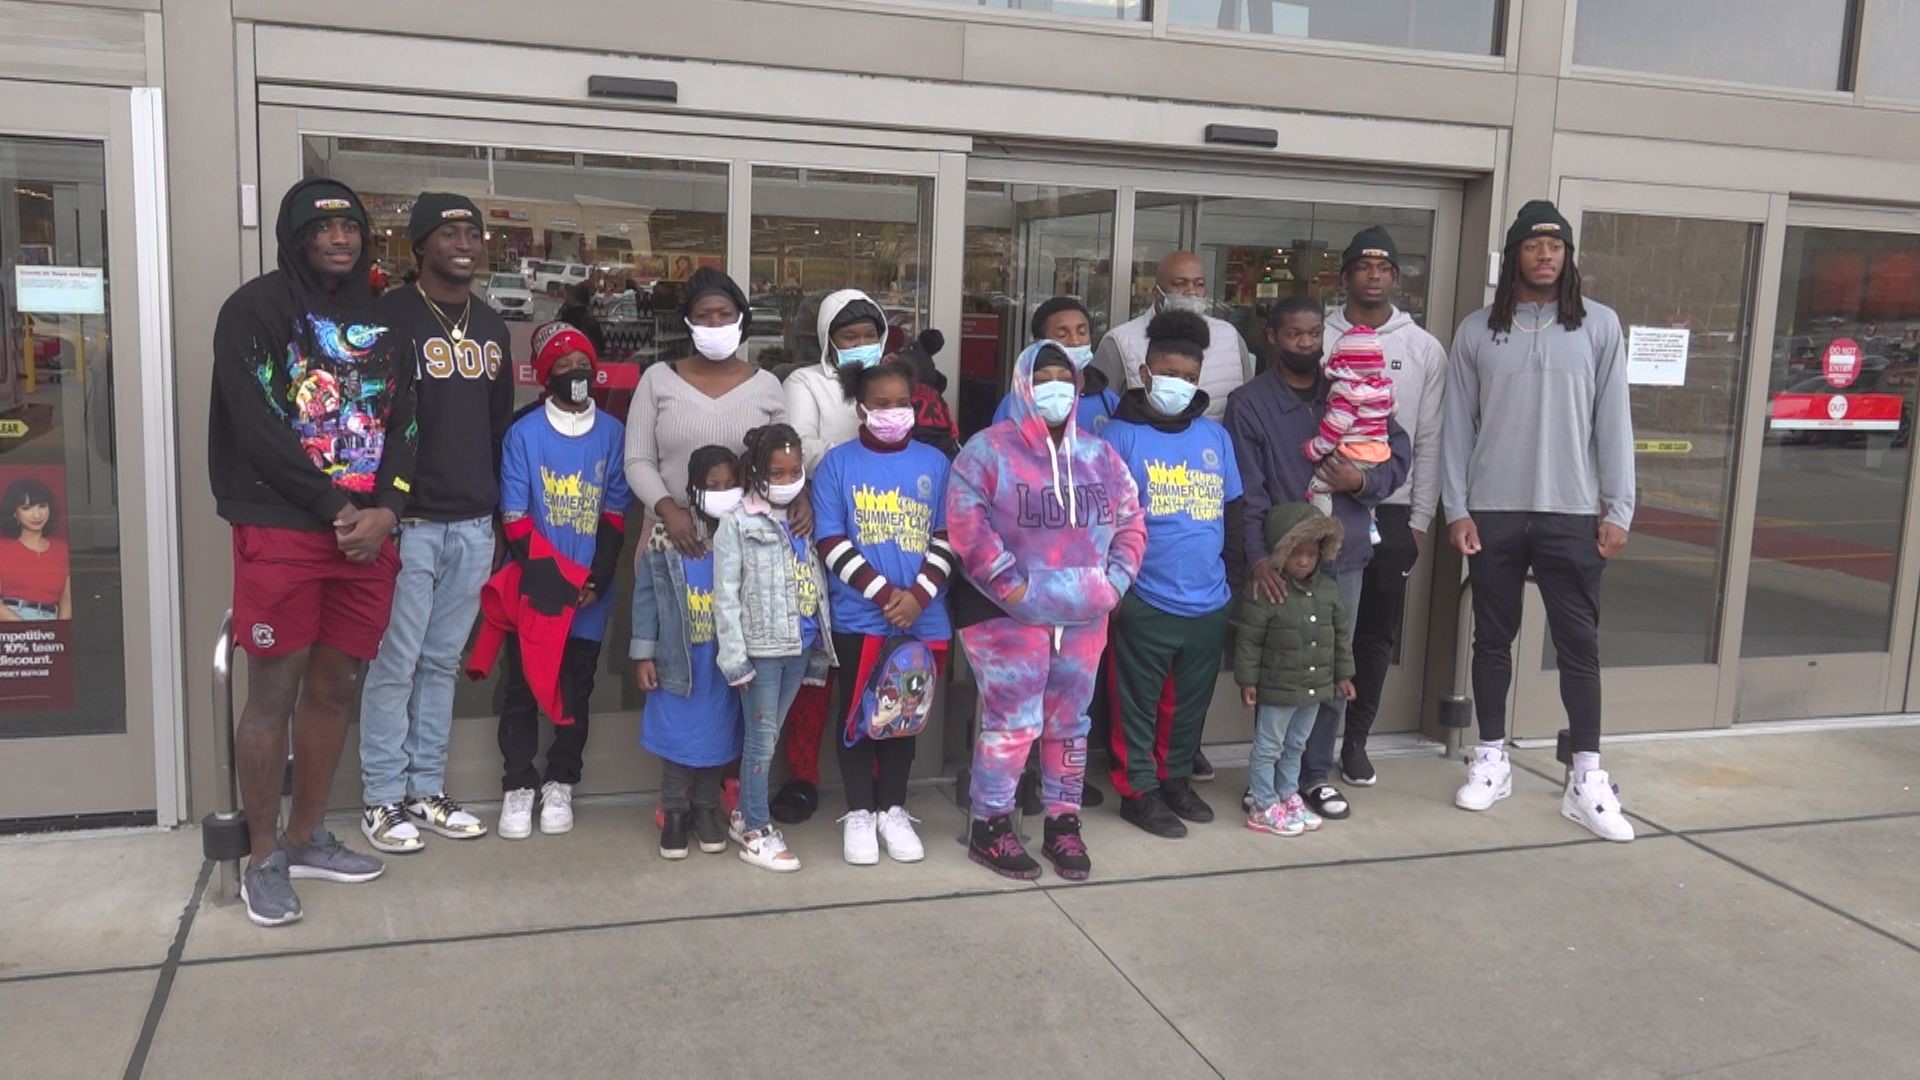 Four members of the Gamecock football team spent their Mondays going Christmas shopping with kids from the City of Columbia Parks and Recreation department.